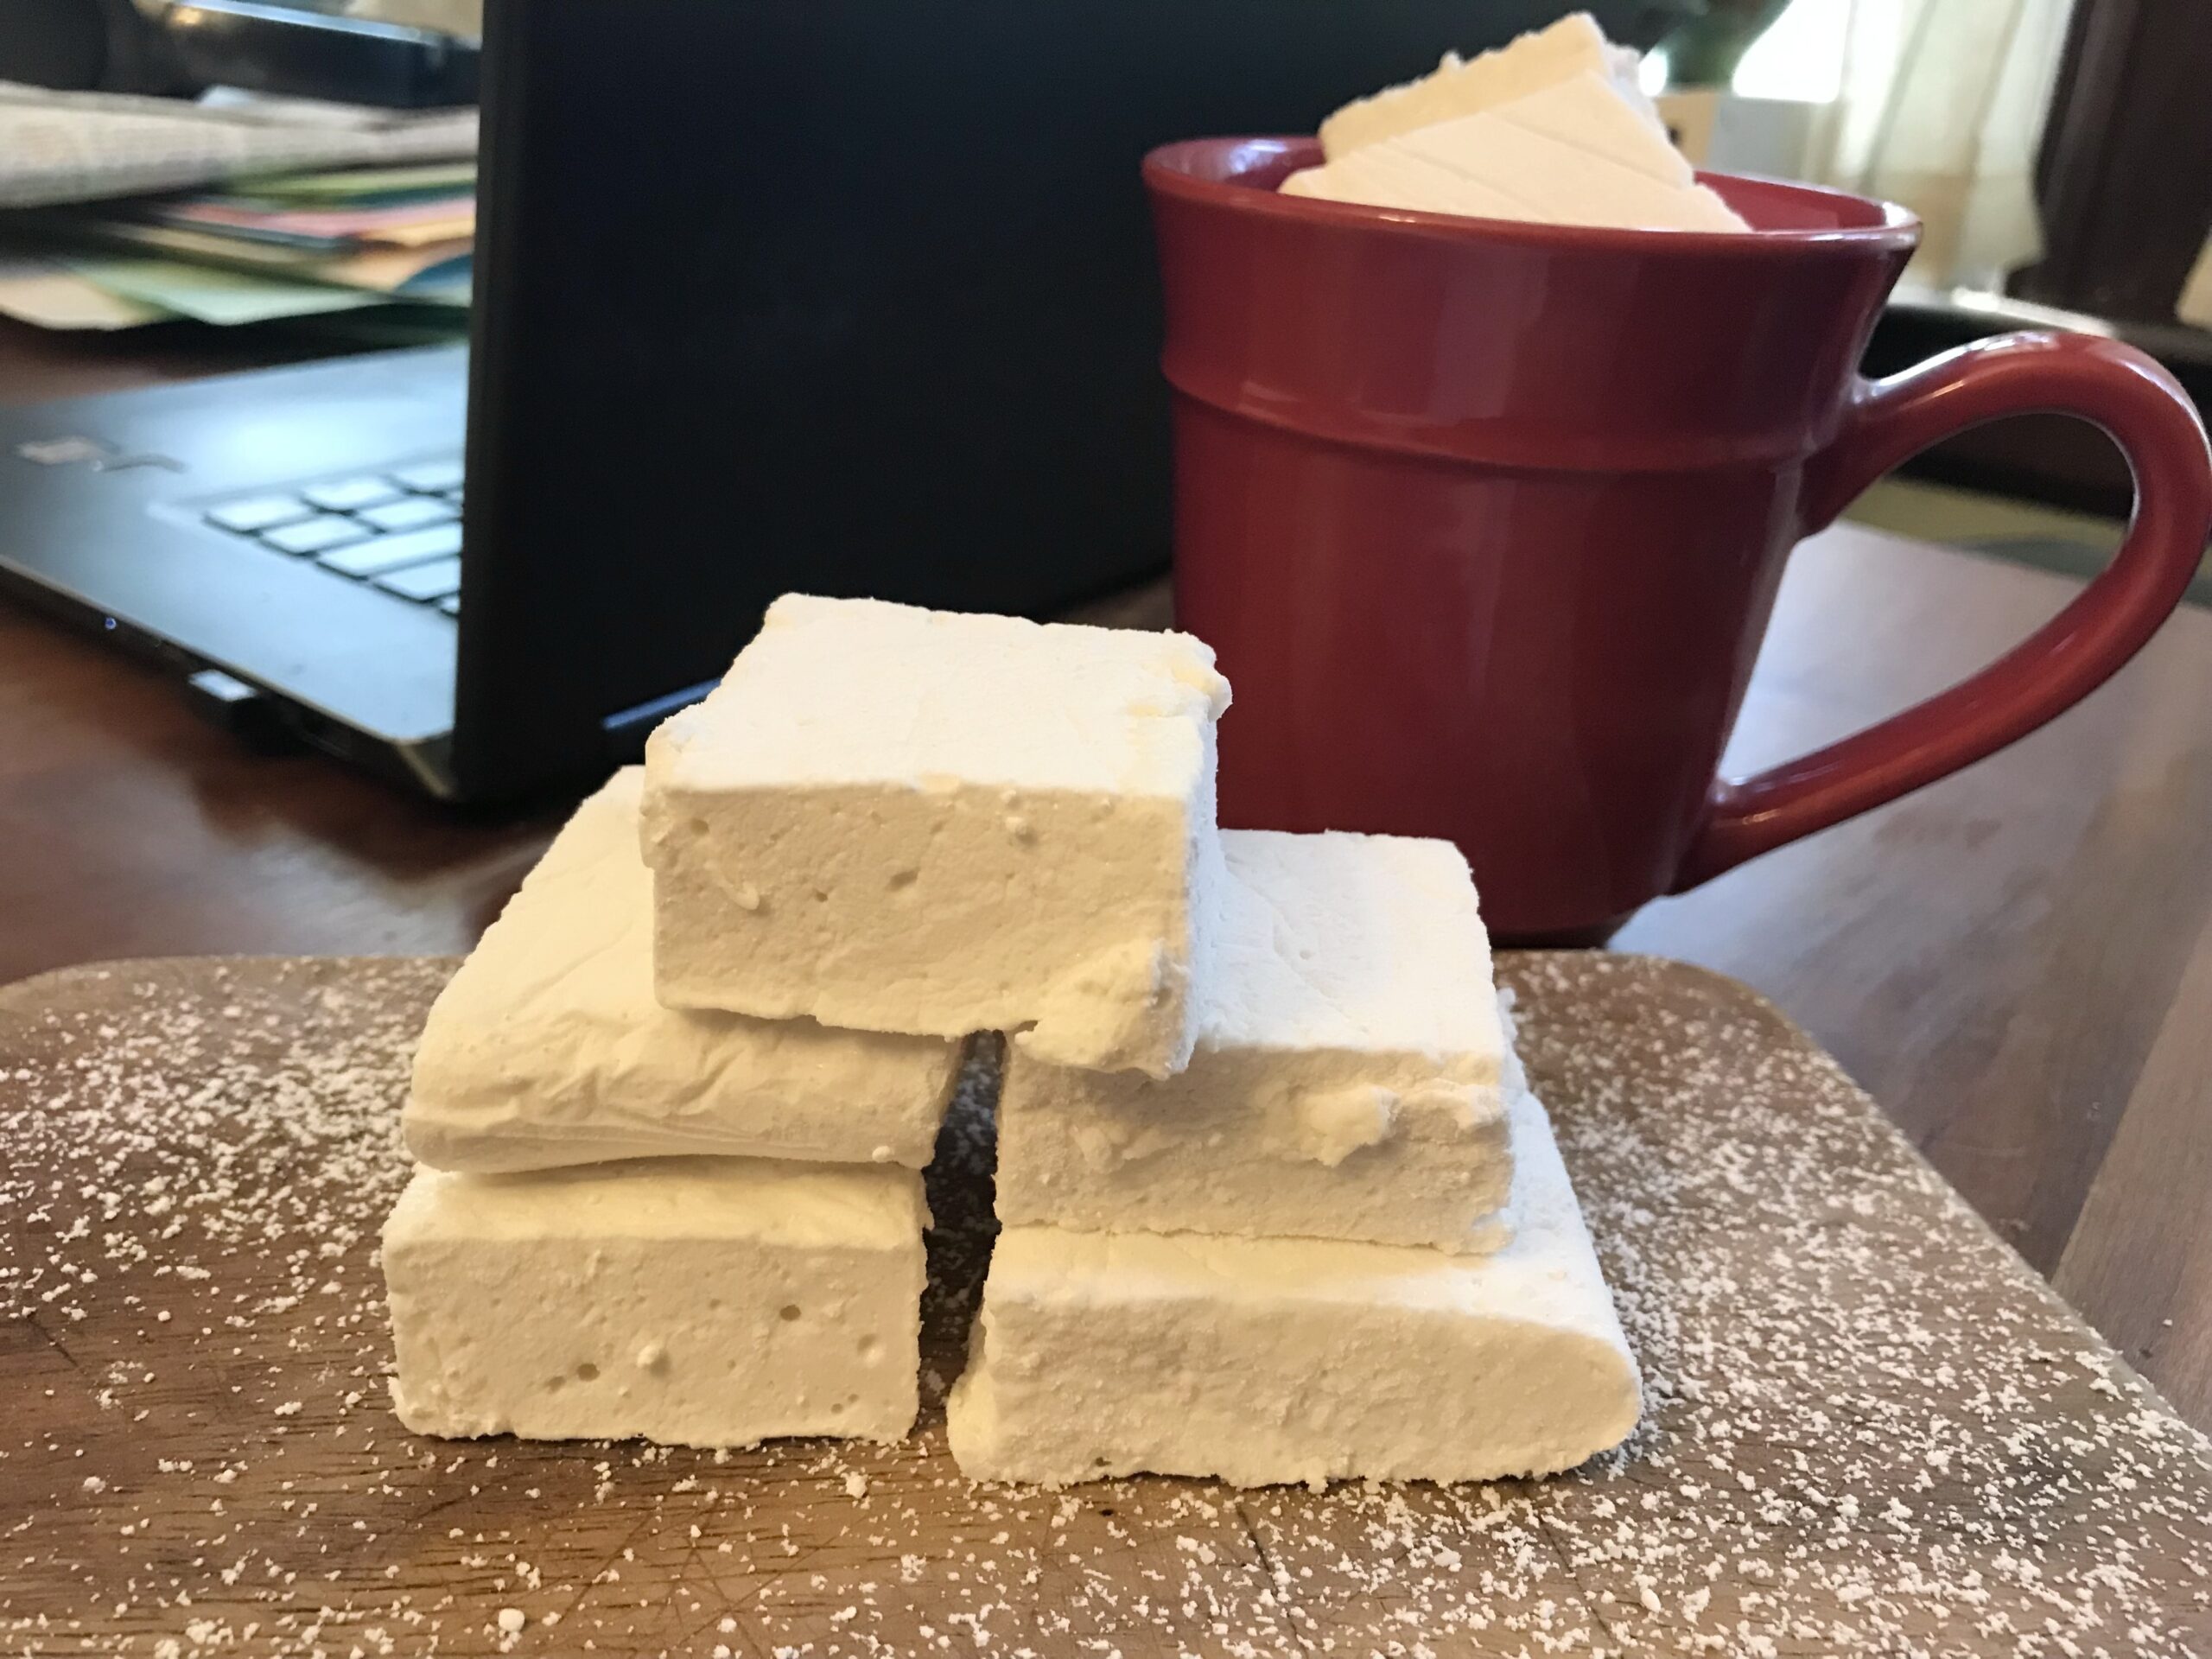 Homemade marshmallows sprinkled with powdered sugar on a cutting board, next to a mug of hot chocolate with a marshmallow in it.